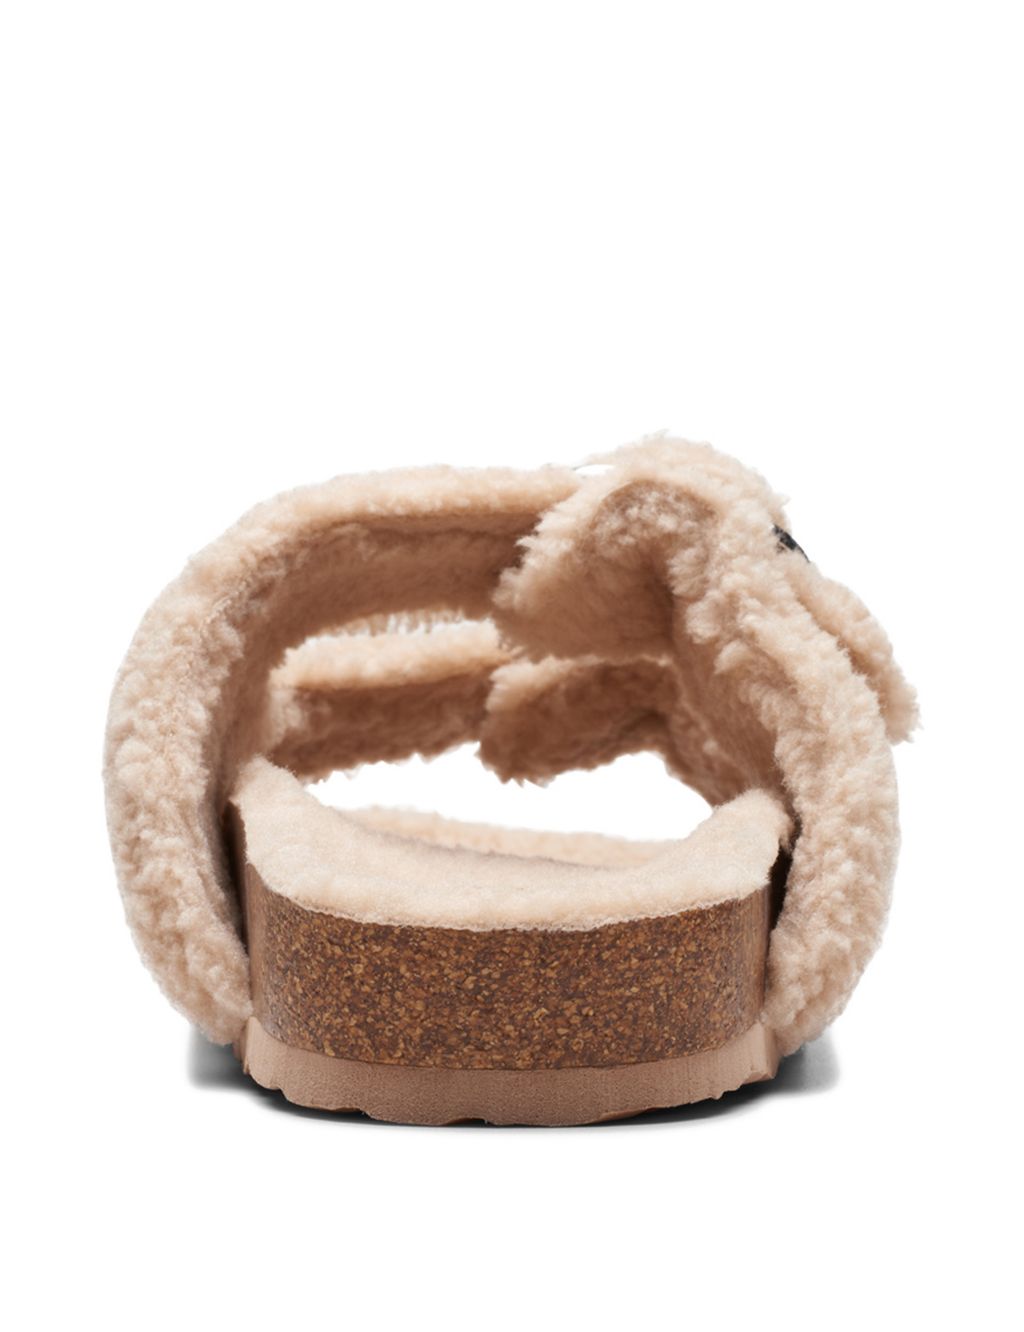 Faux Shearling Buckle Slider Slippers image 7